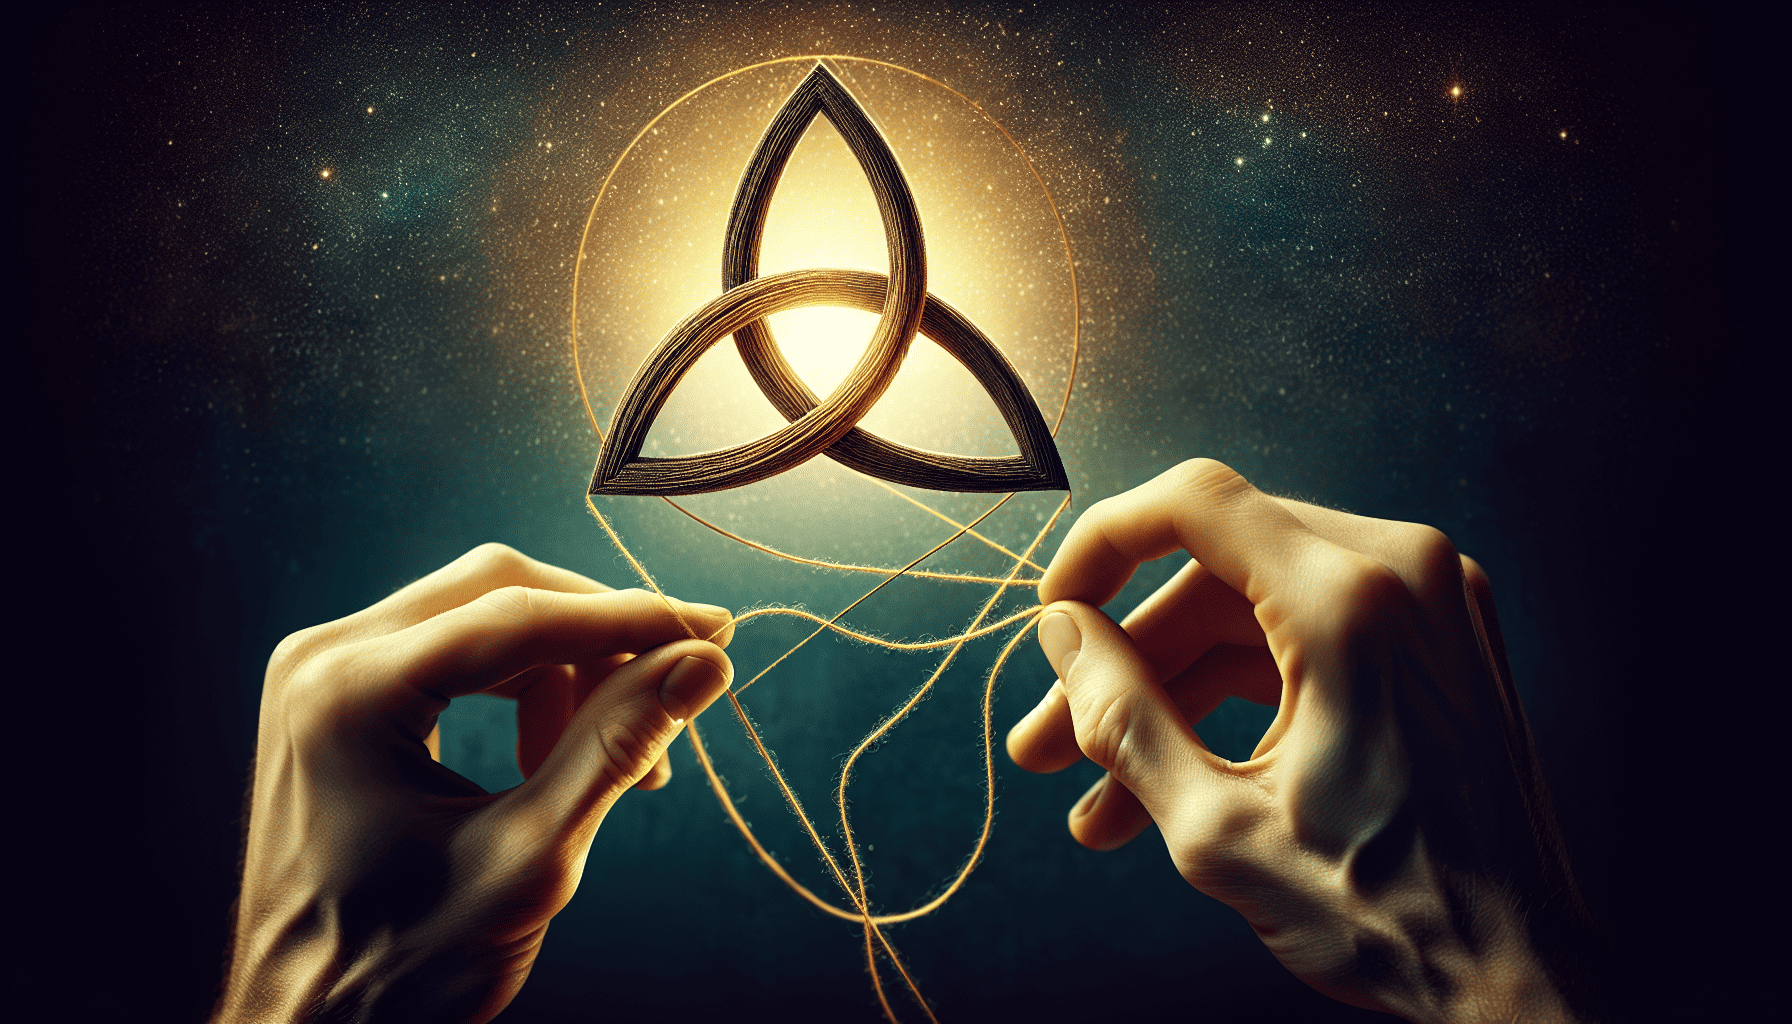 Intricate illustration of the process of creating a Triquetra symbol, symbolizing eternity and interconnectedness